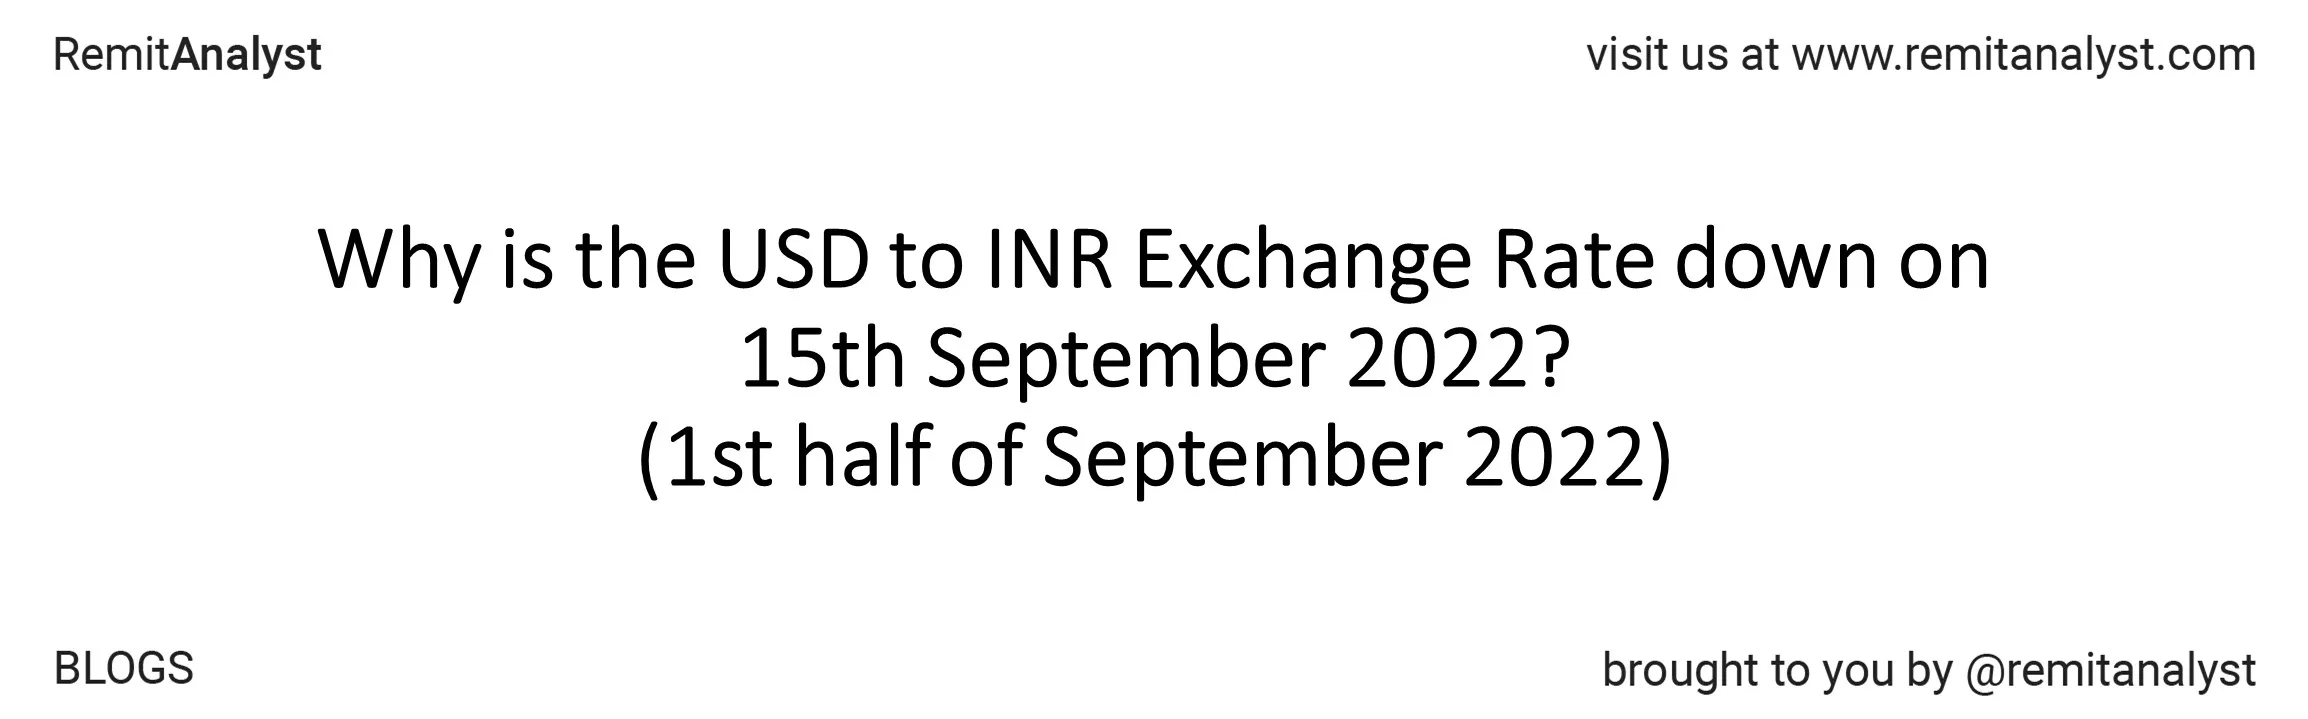 usd-to-inr-exchange-rate-1-Sep-2022-to-15-Sep-2022-title